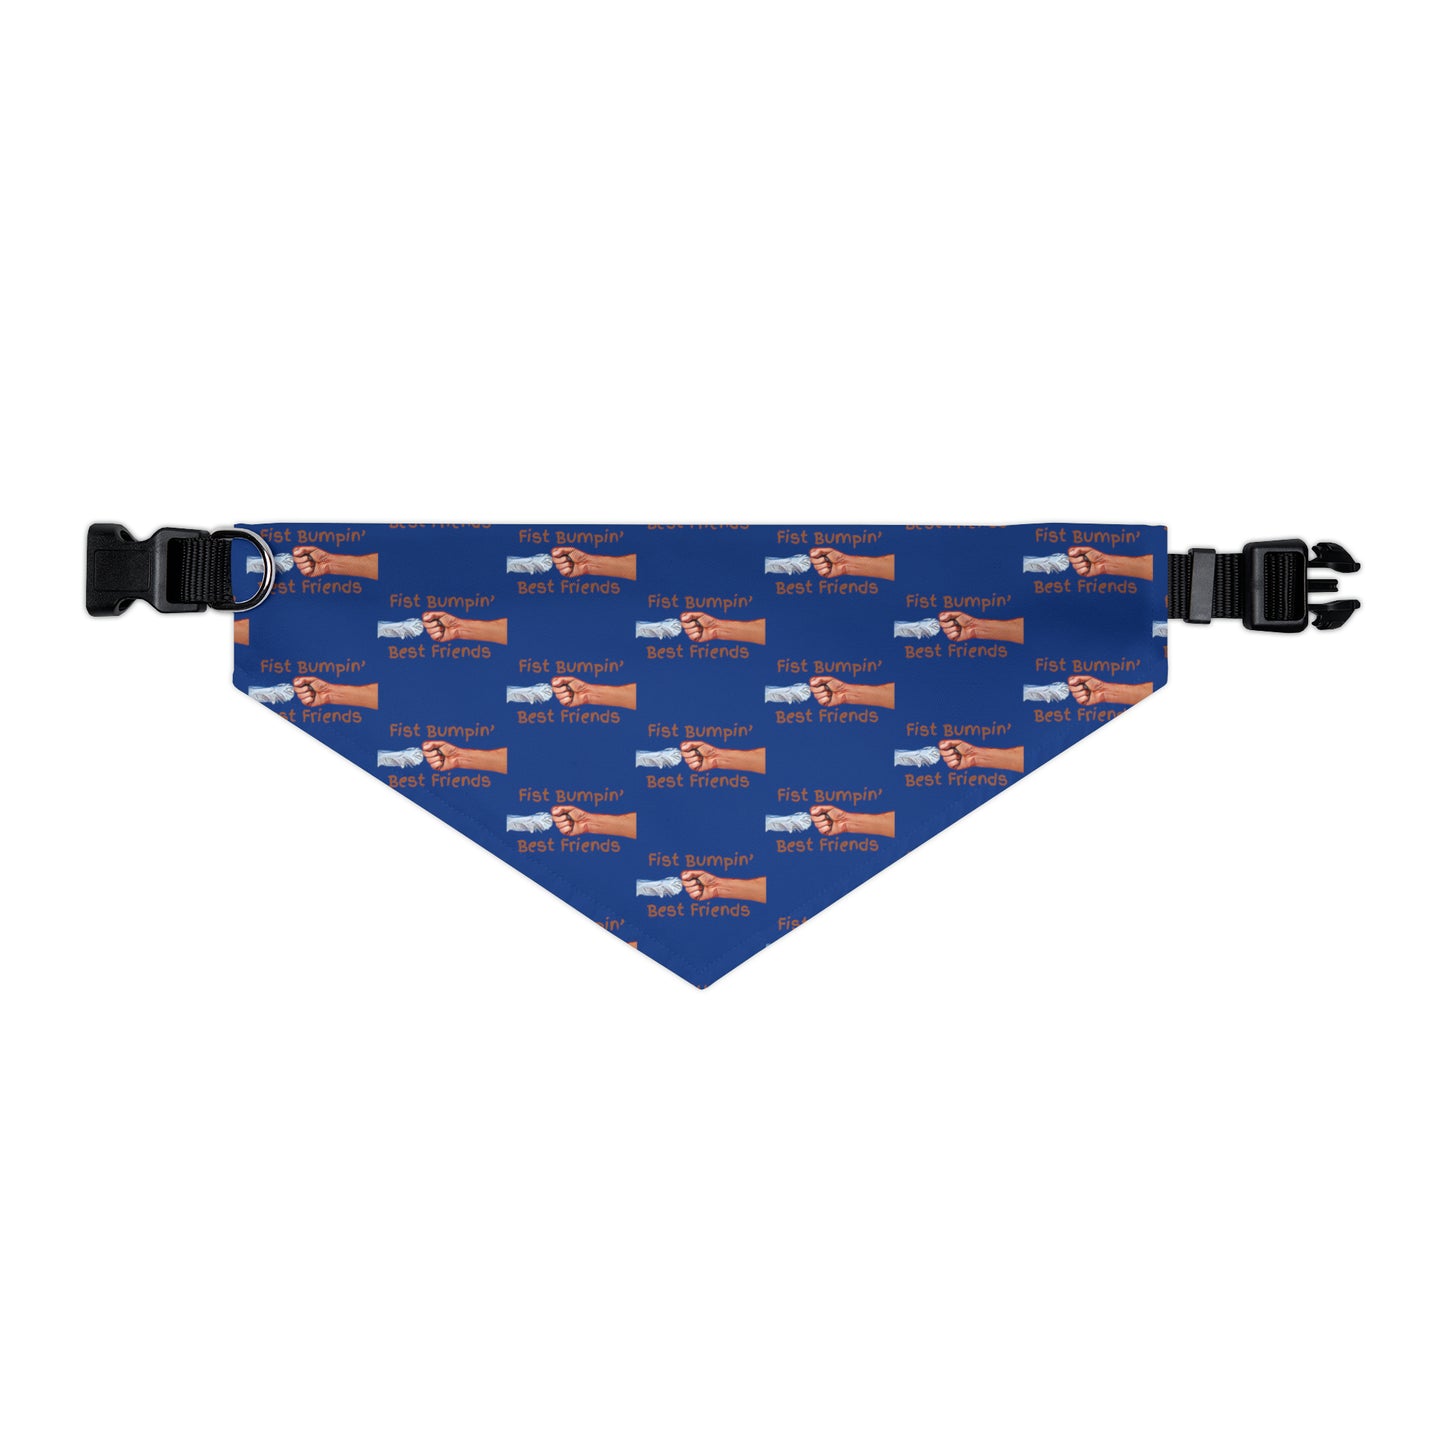 Fist Bumpin’ Best Friends Opie’s Cavalier King Charles Spaniel Pet Bandana Collar Blue with Brown lettering.